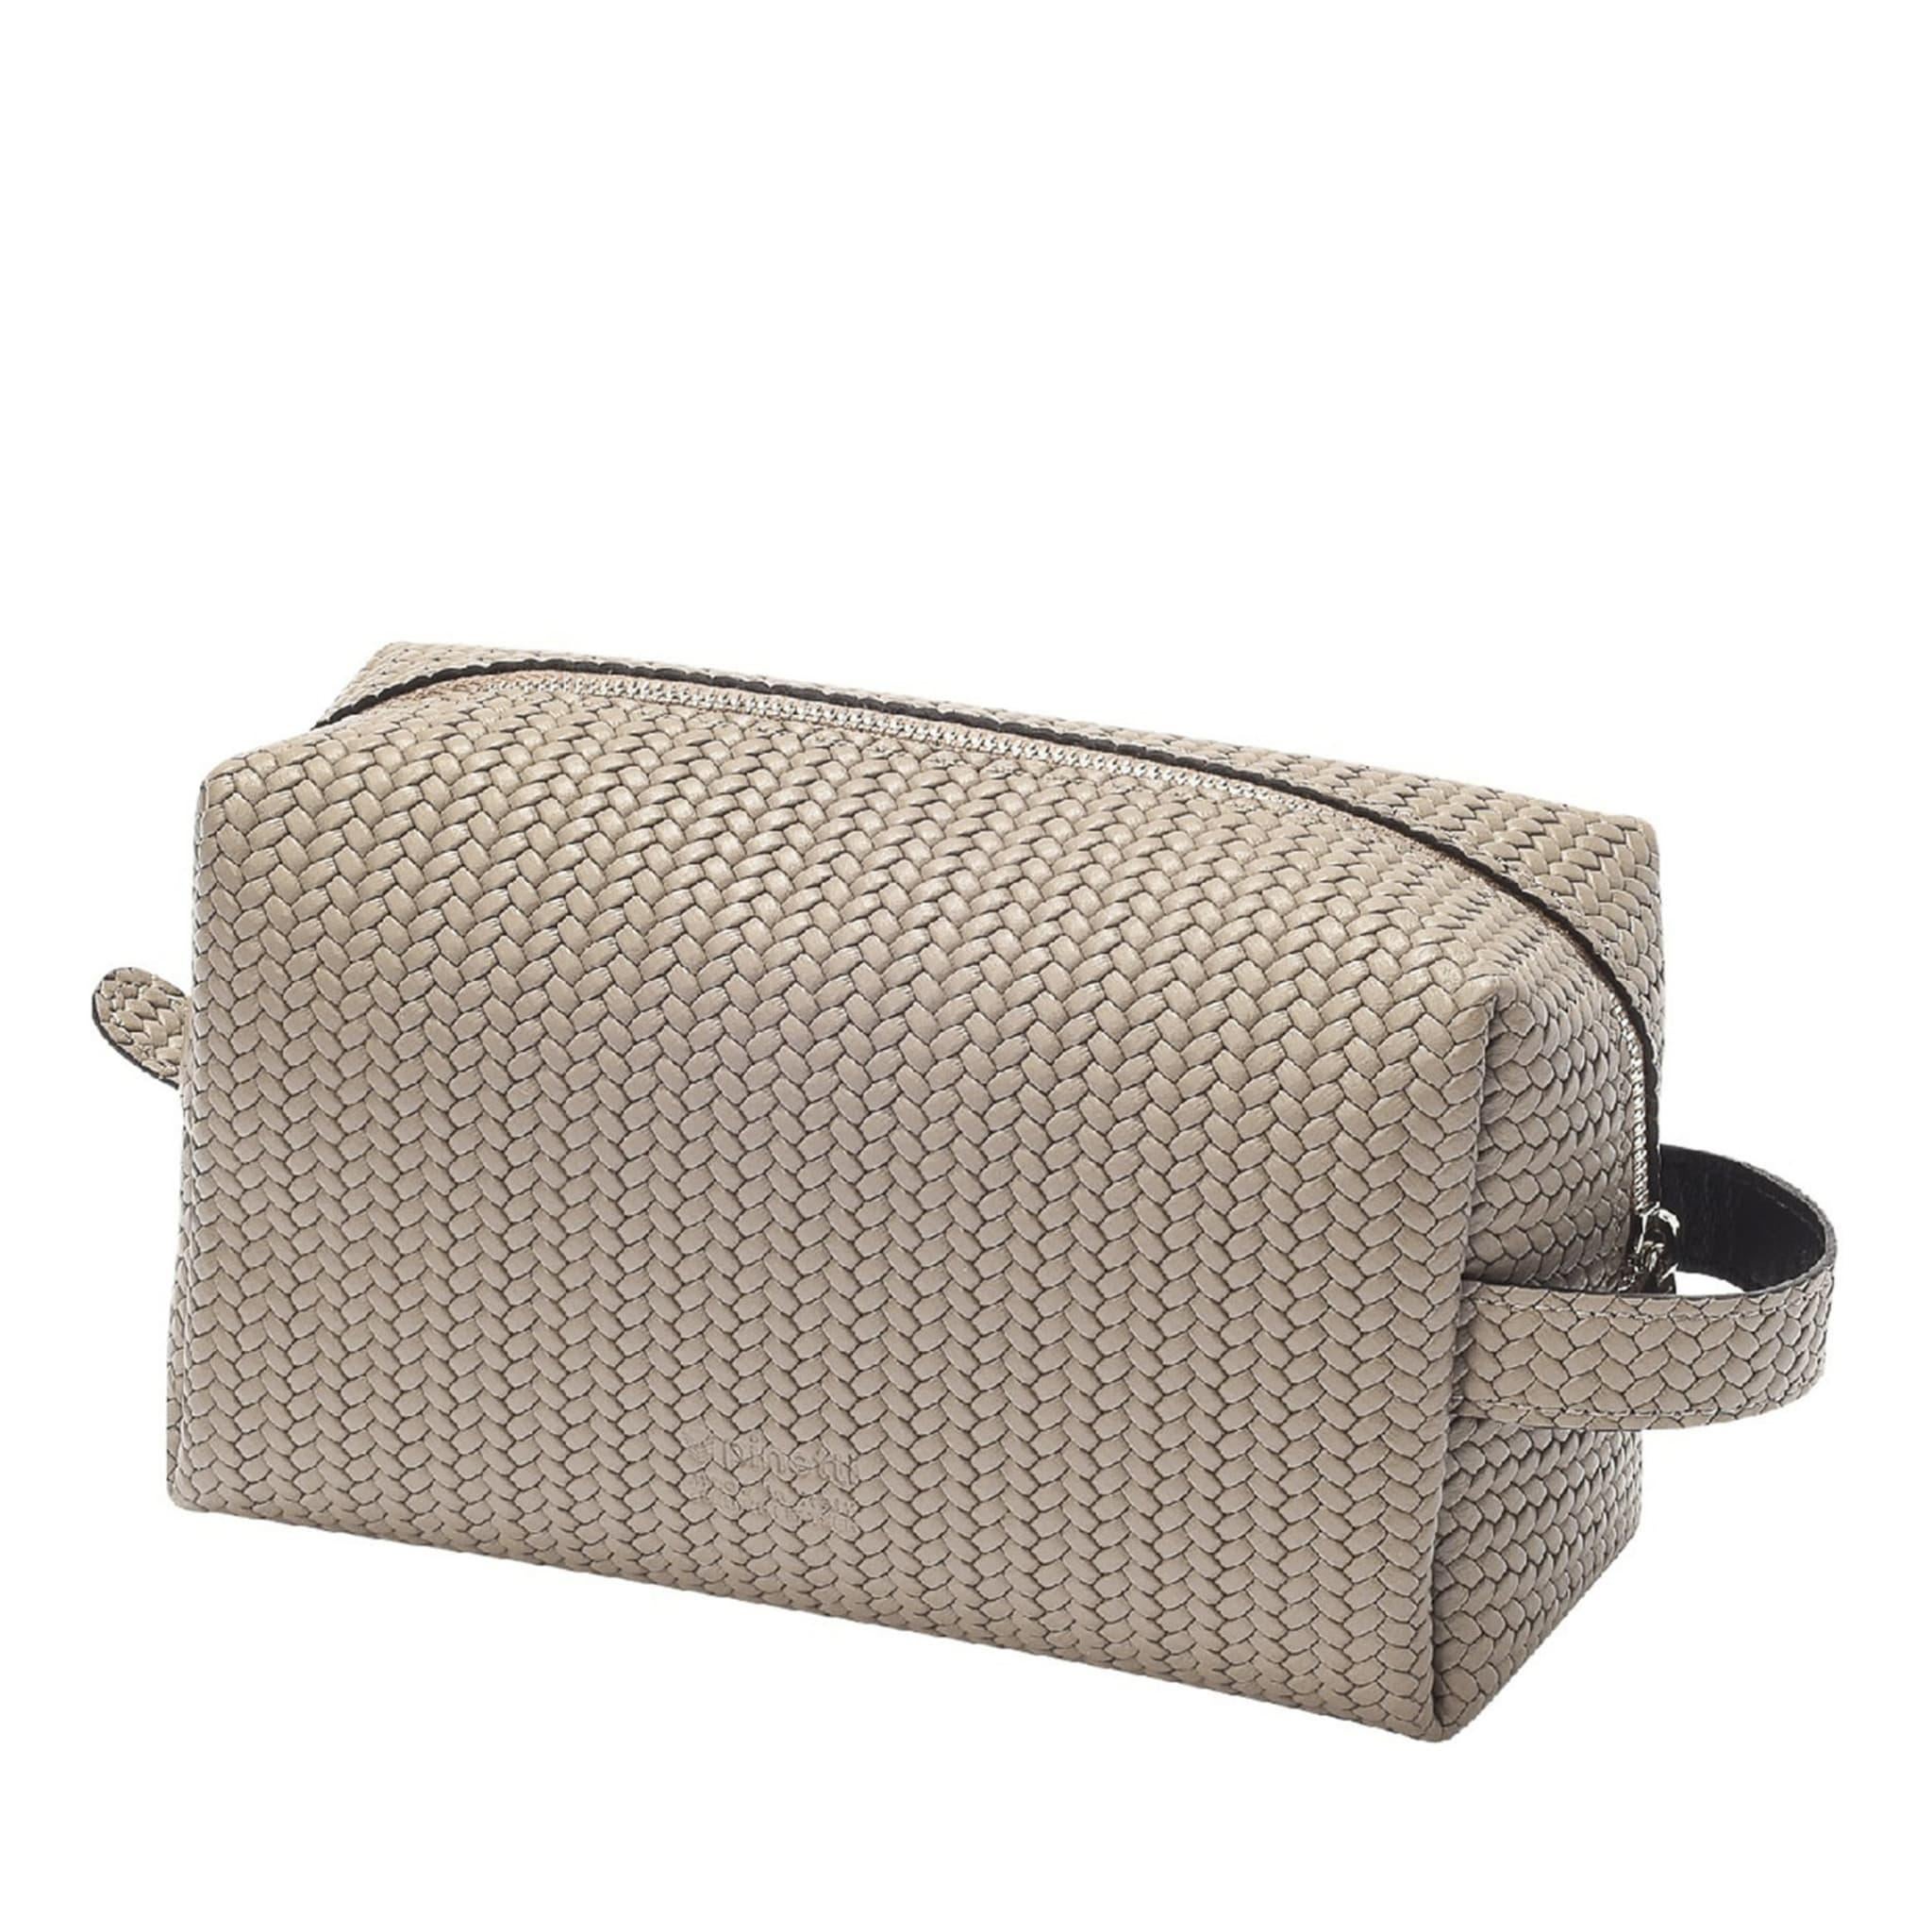 0This elegant make up bag in beige is a precious accessory and a perfect mix of functionality, versatility and sophistication, thanks to the exquisite leather used to make it. The light color makes it a bright accent either to everyday use in a